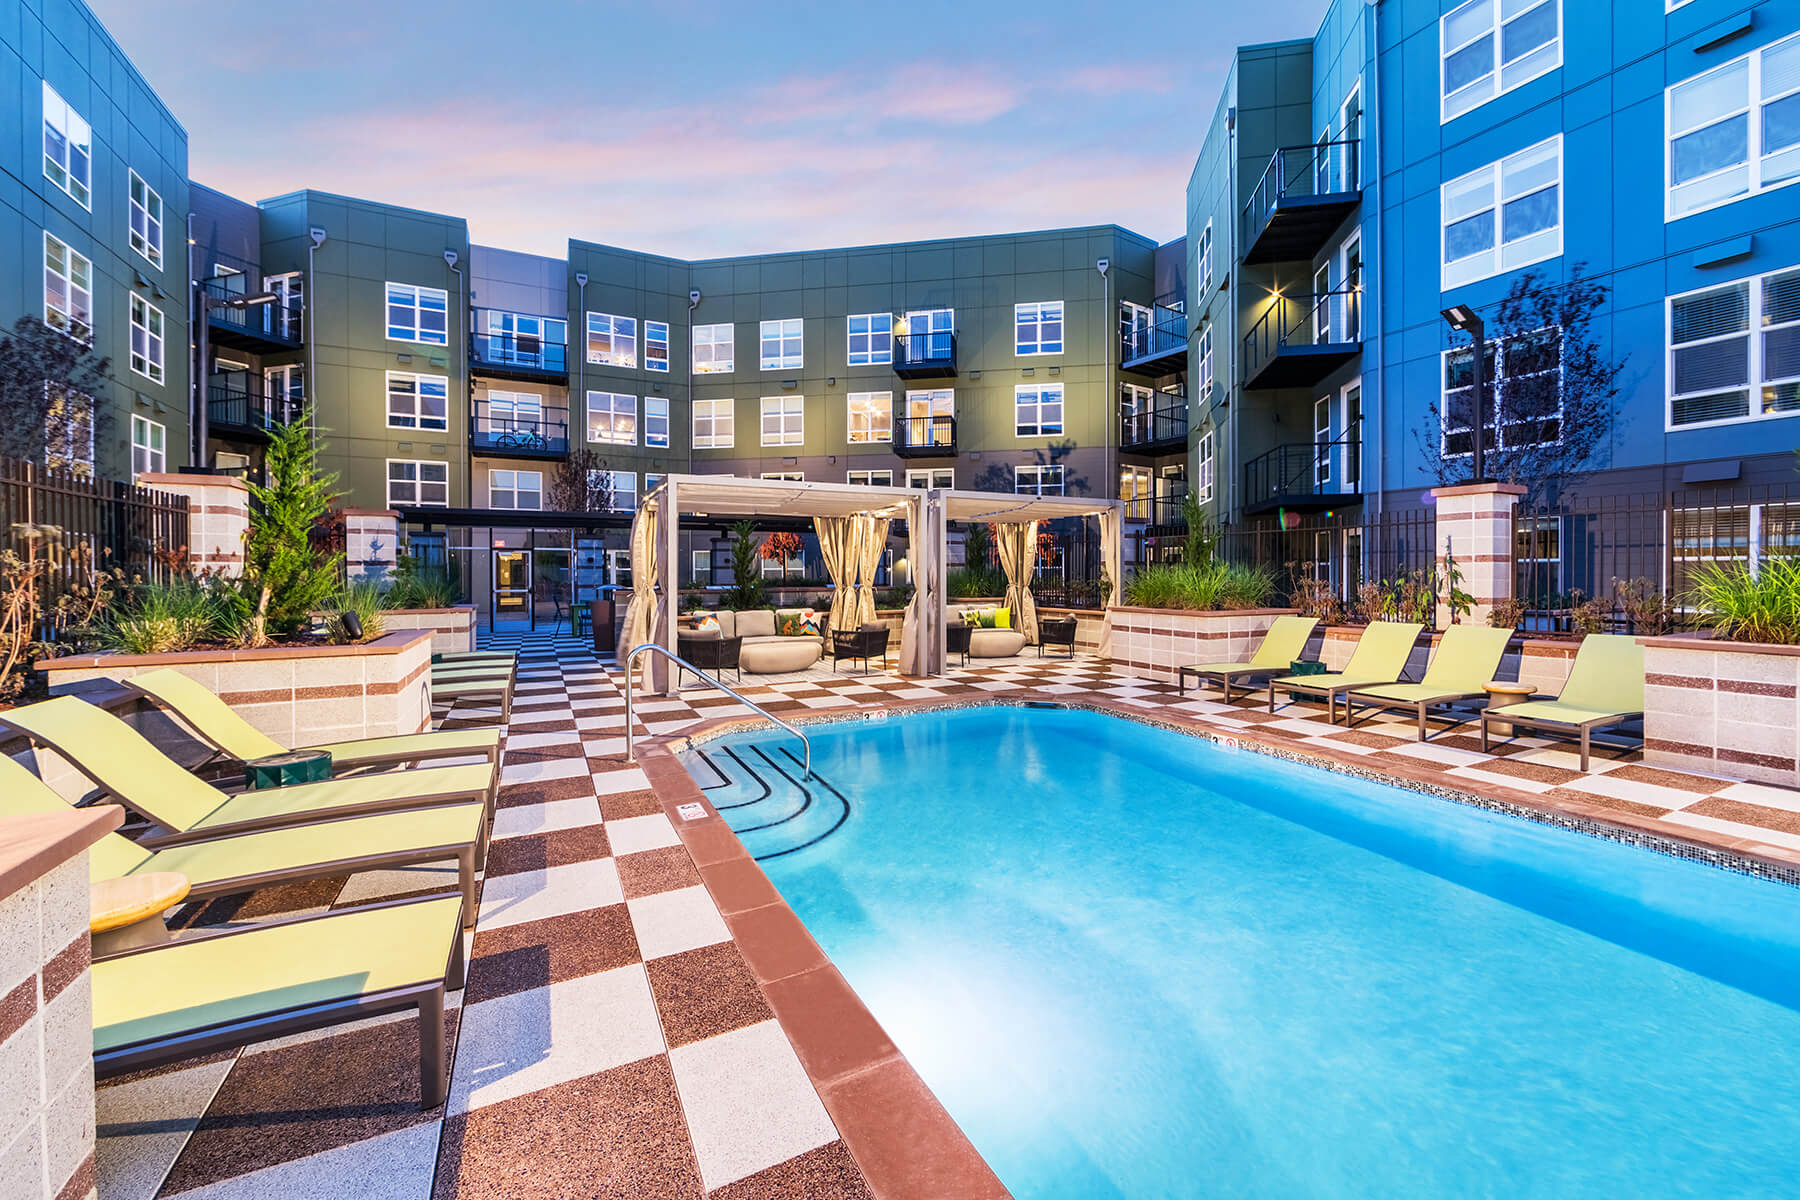 A luxury pool in the courtyard of the Aspect at Totem Lake Apartments in Kirkland, Washington.